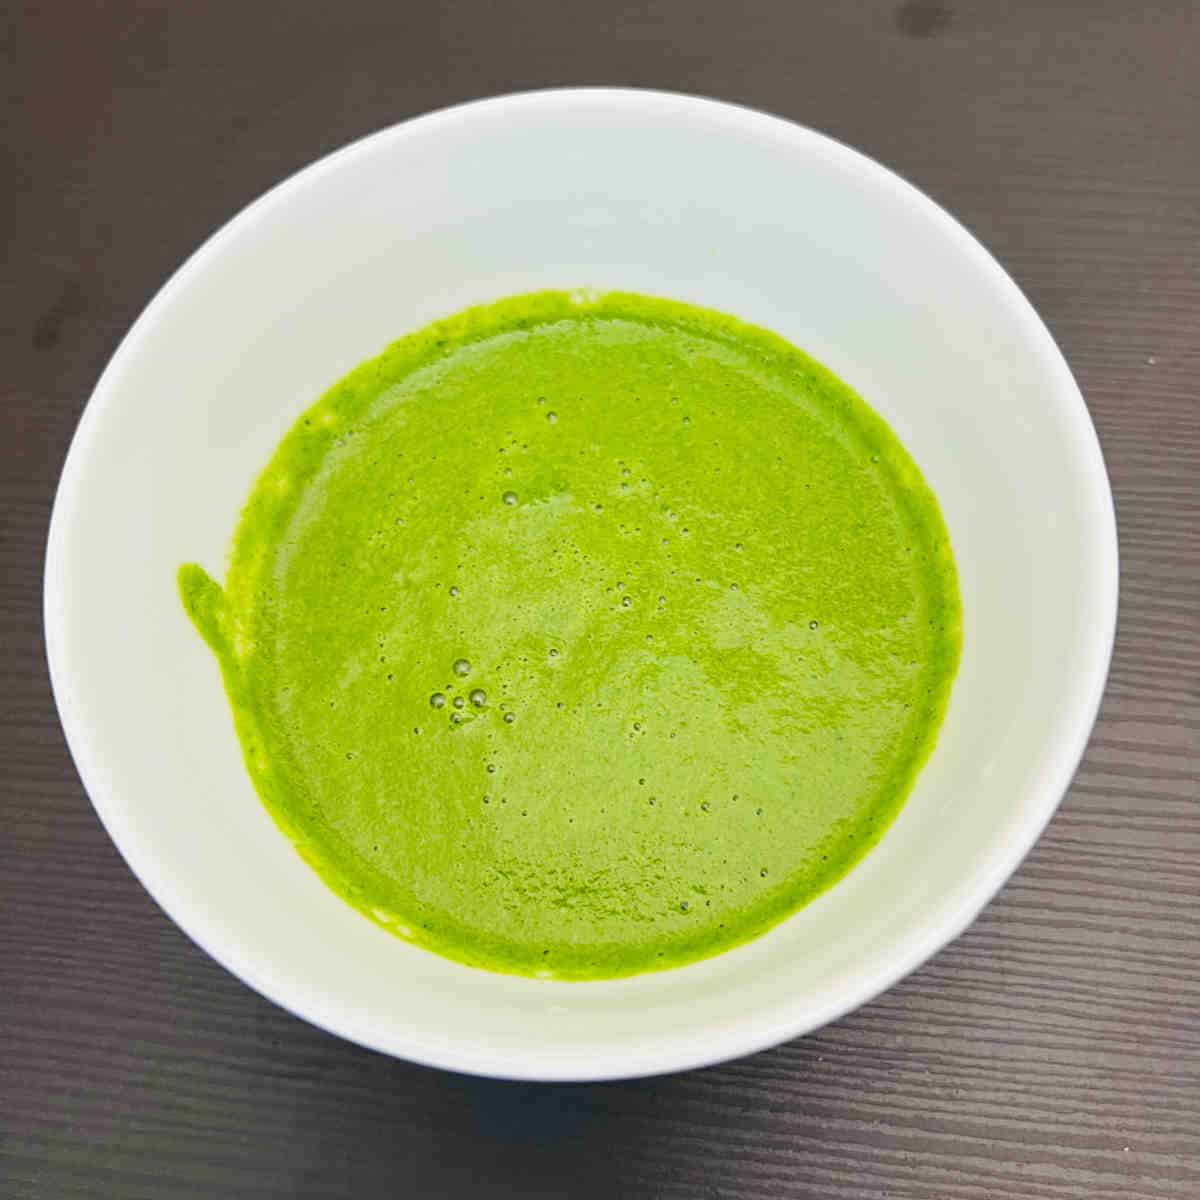 Grind the ingredients of mint chutney into a smooth paste.